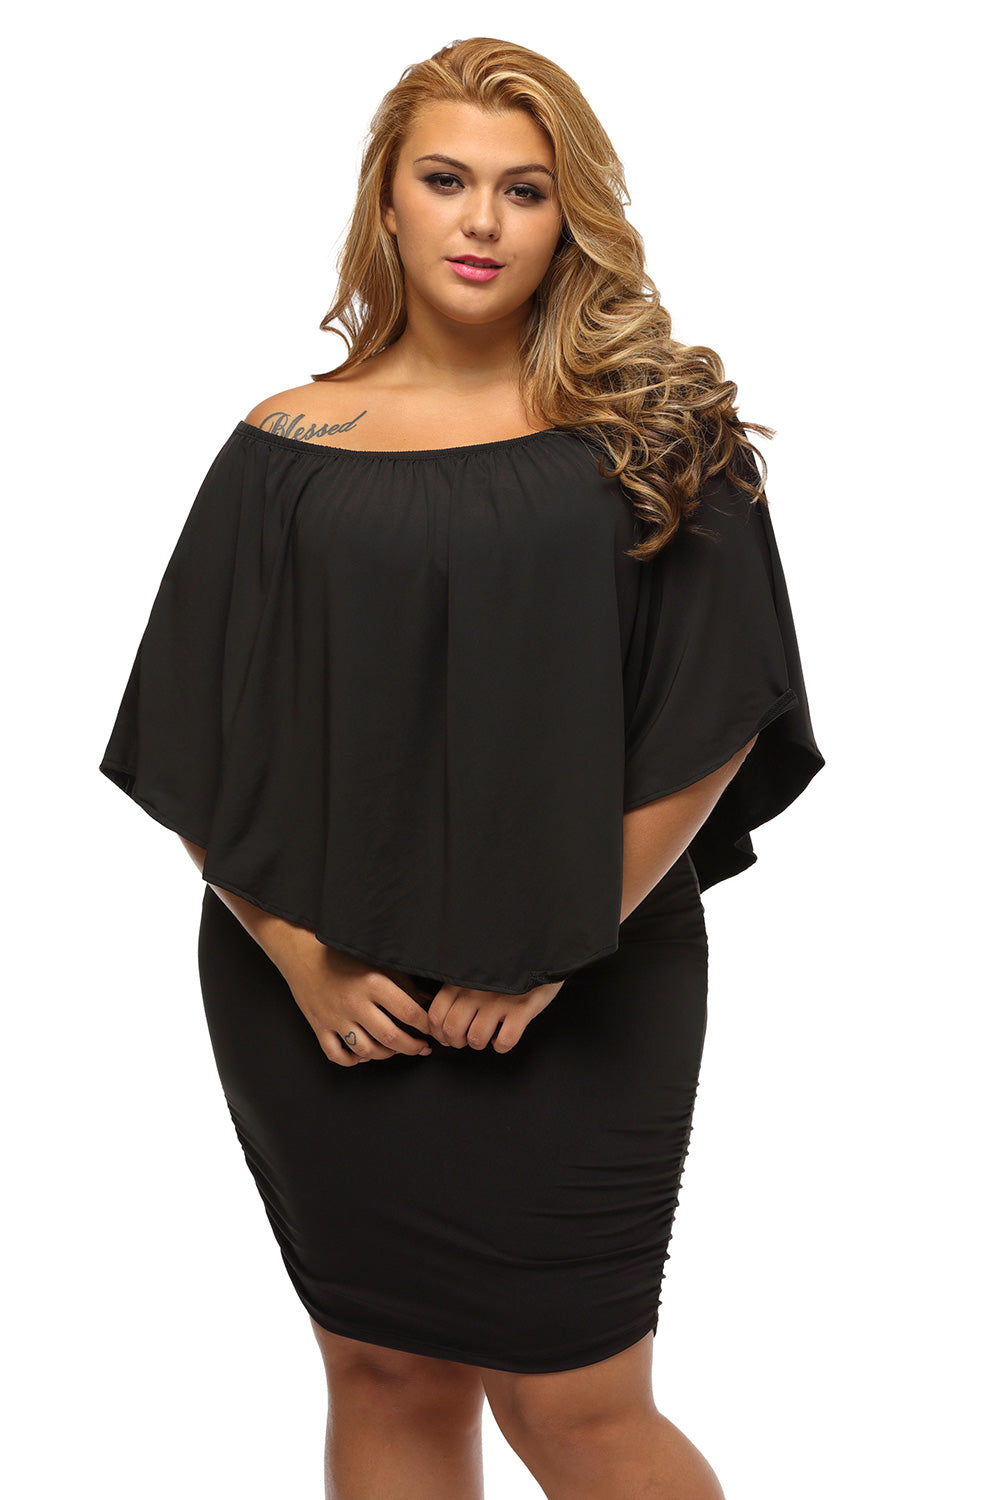 Sexy Plus Size Dresses for Women